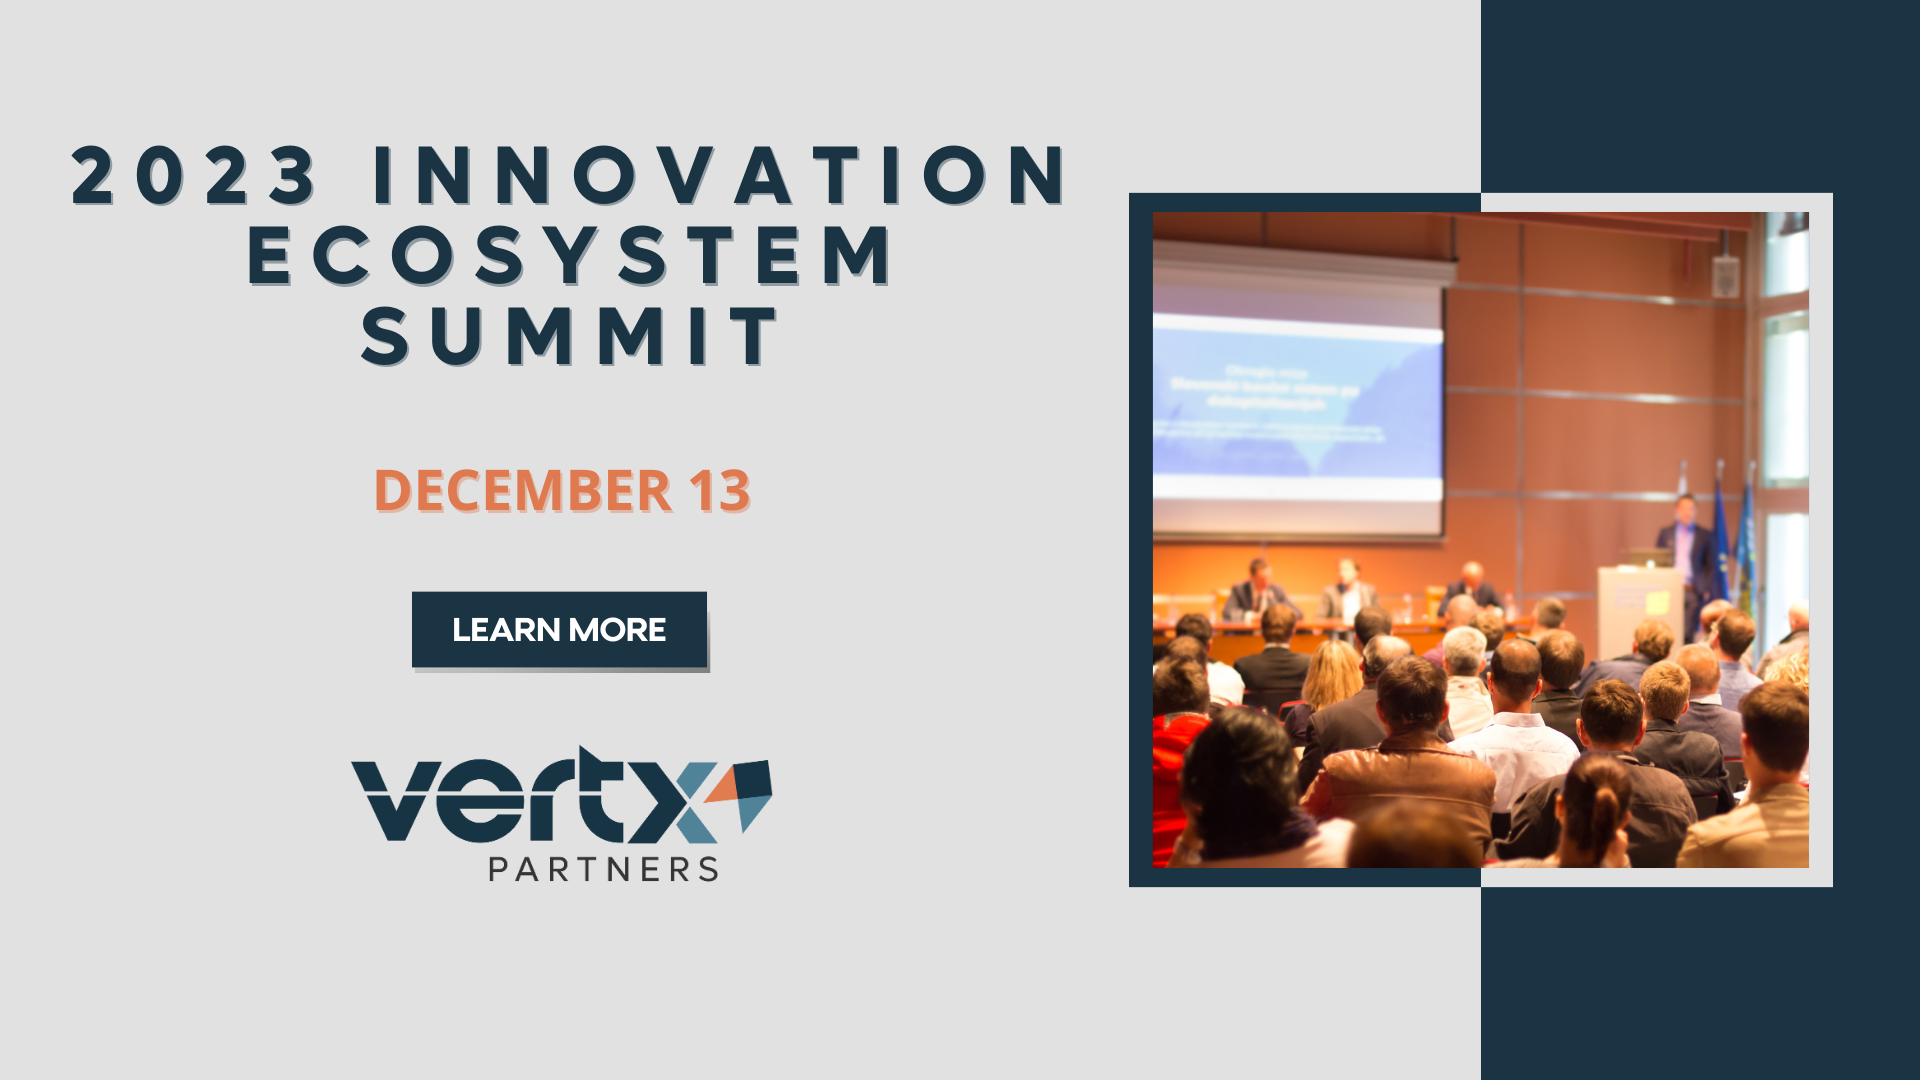 This graphic has the title 2023 innovation ecosystem summit with the date december 13th under it and a photo of a conference room with people in it next to the date